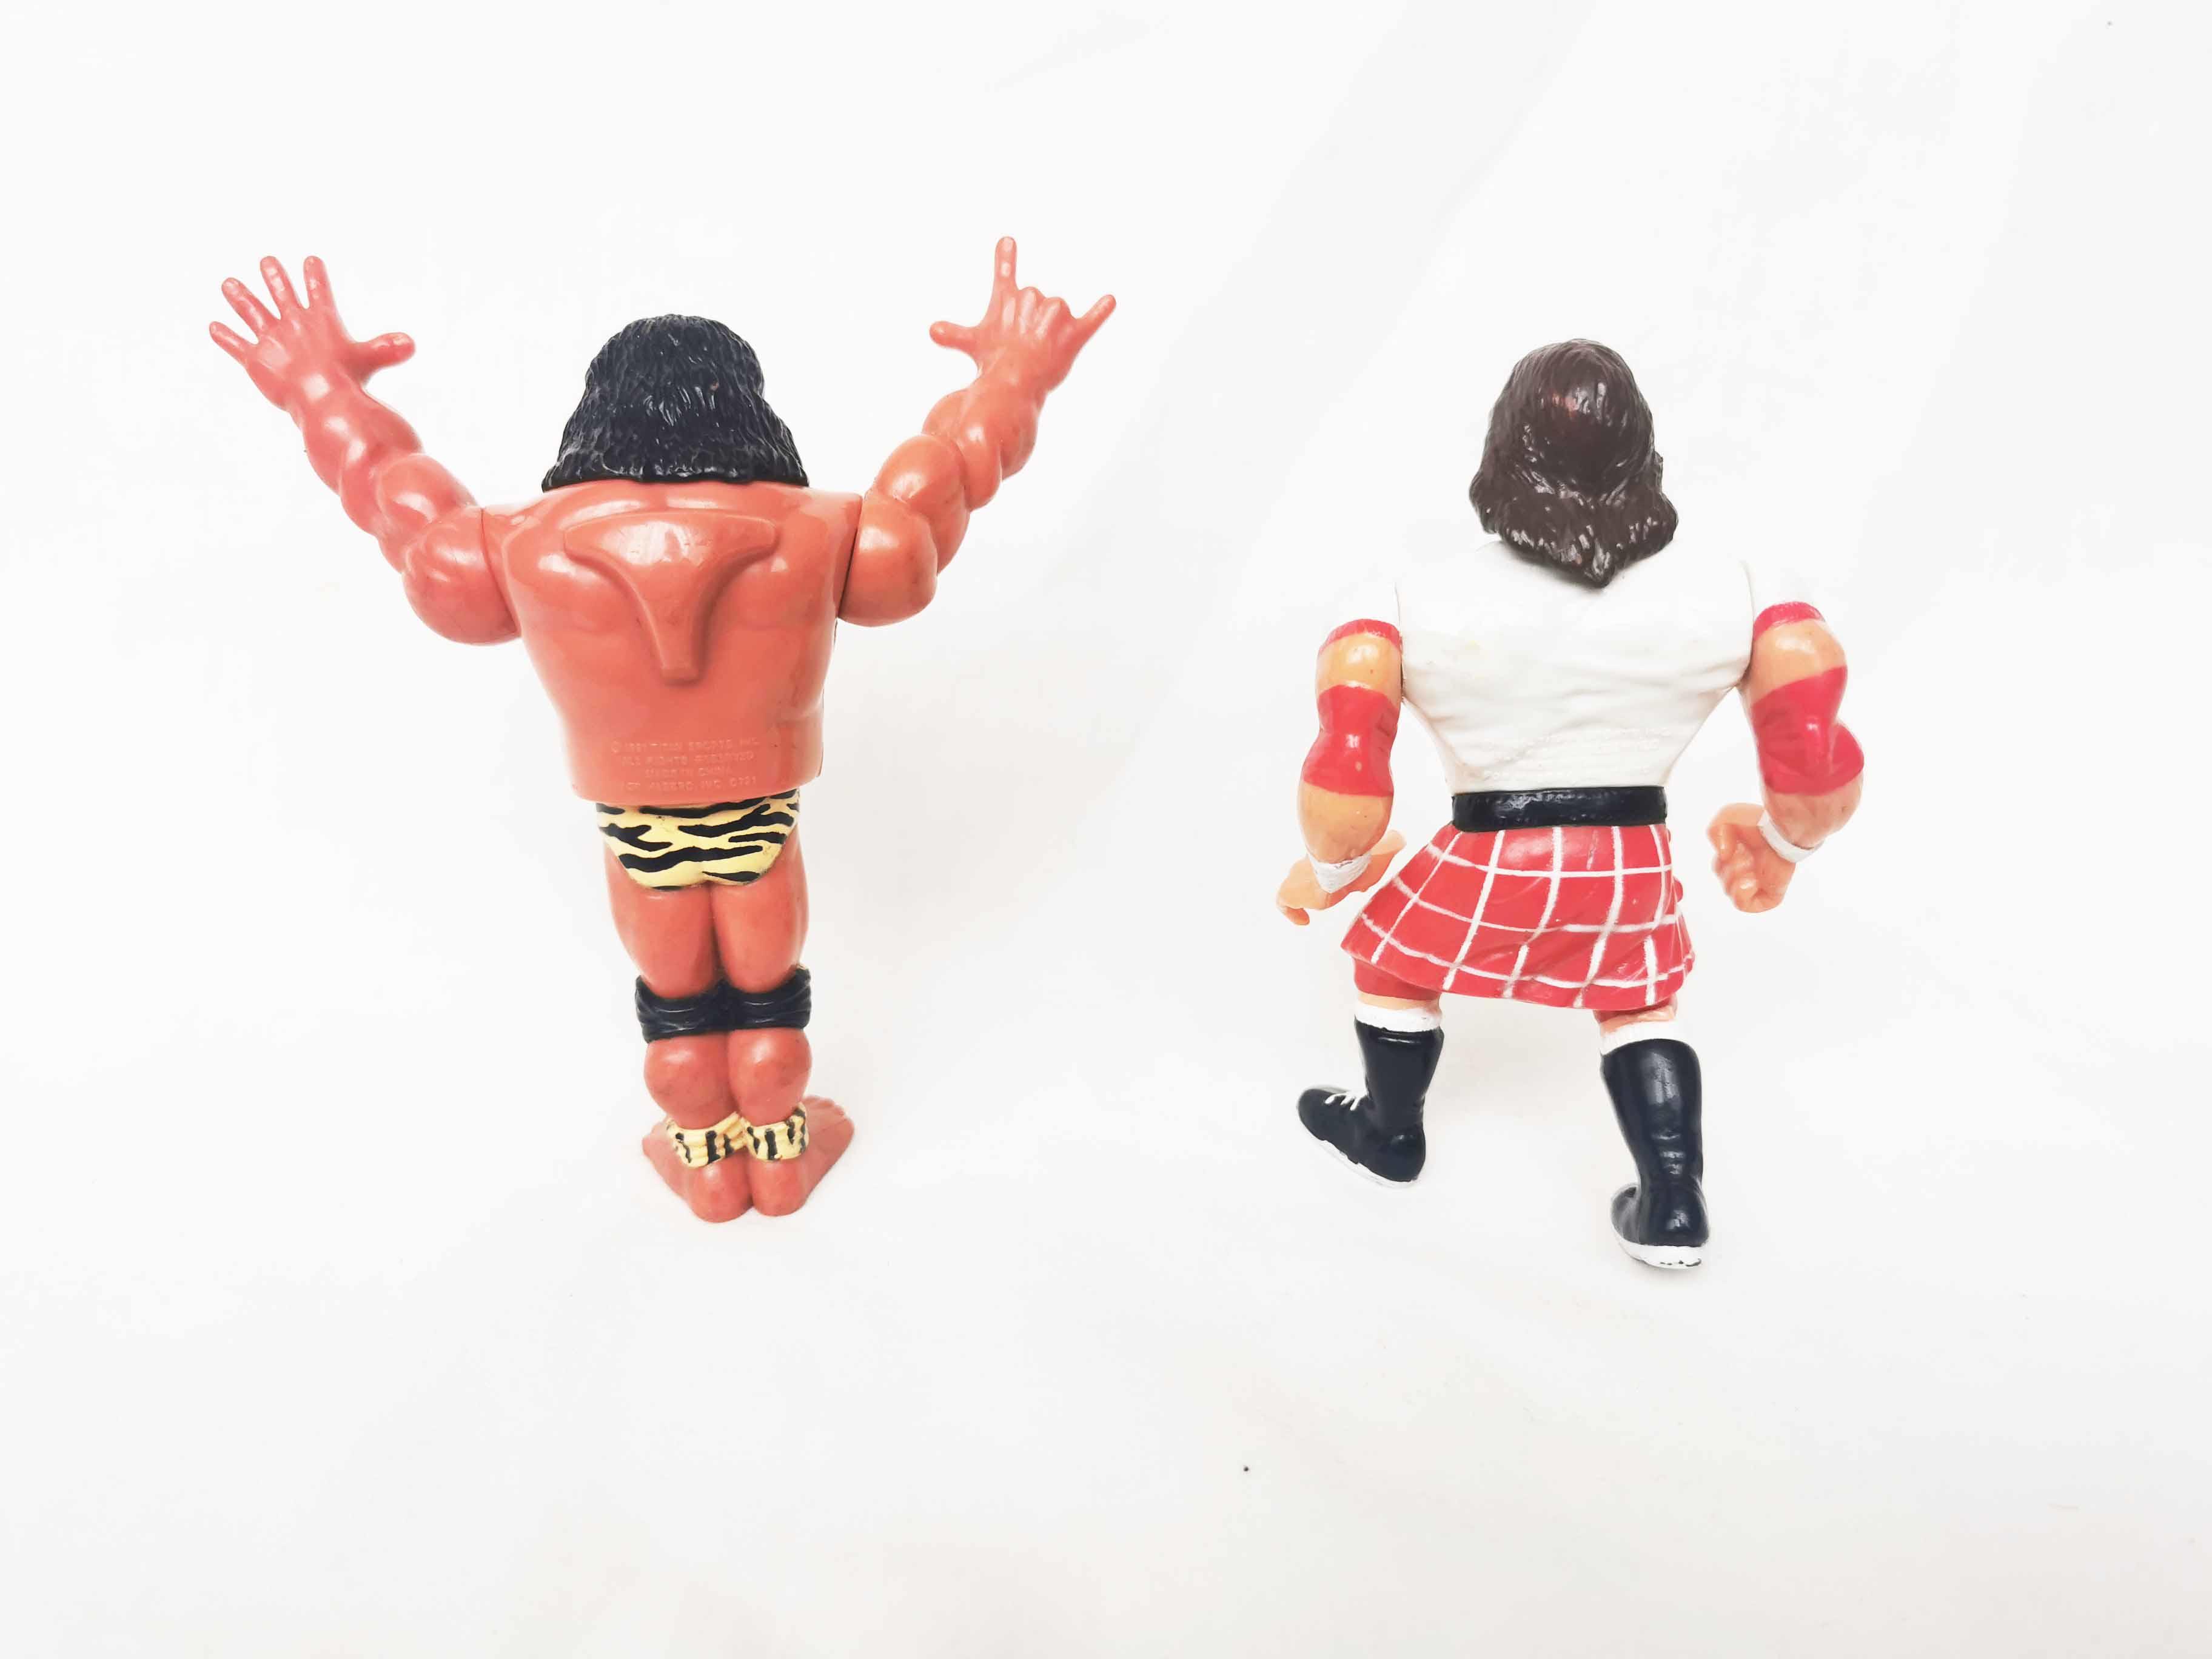 WWE WWF Jimmy Superfly Snuka & Roddy Piper Wrestling Action Figures Hasbro